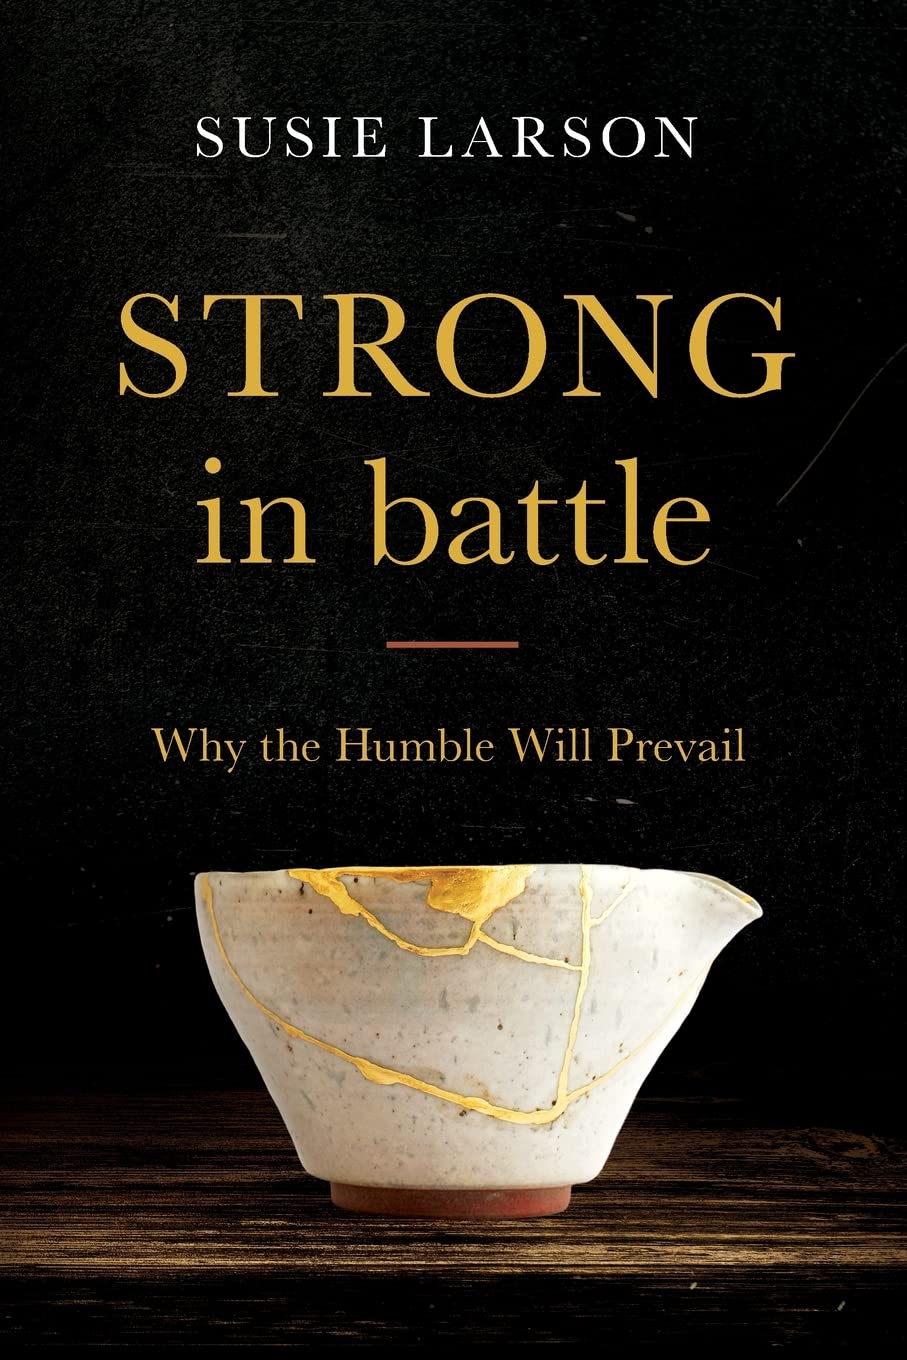 Strong in Battle: Why the Humble Will Prevail (Susie Larson